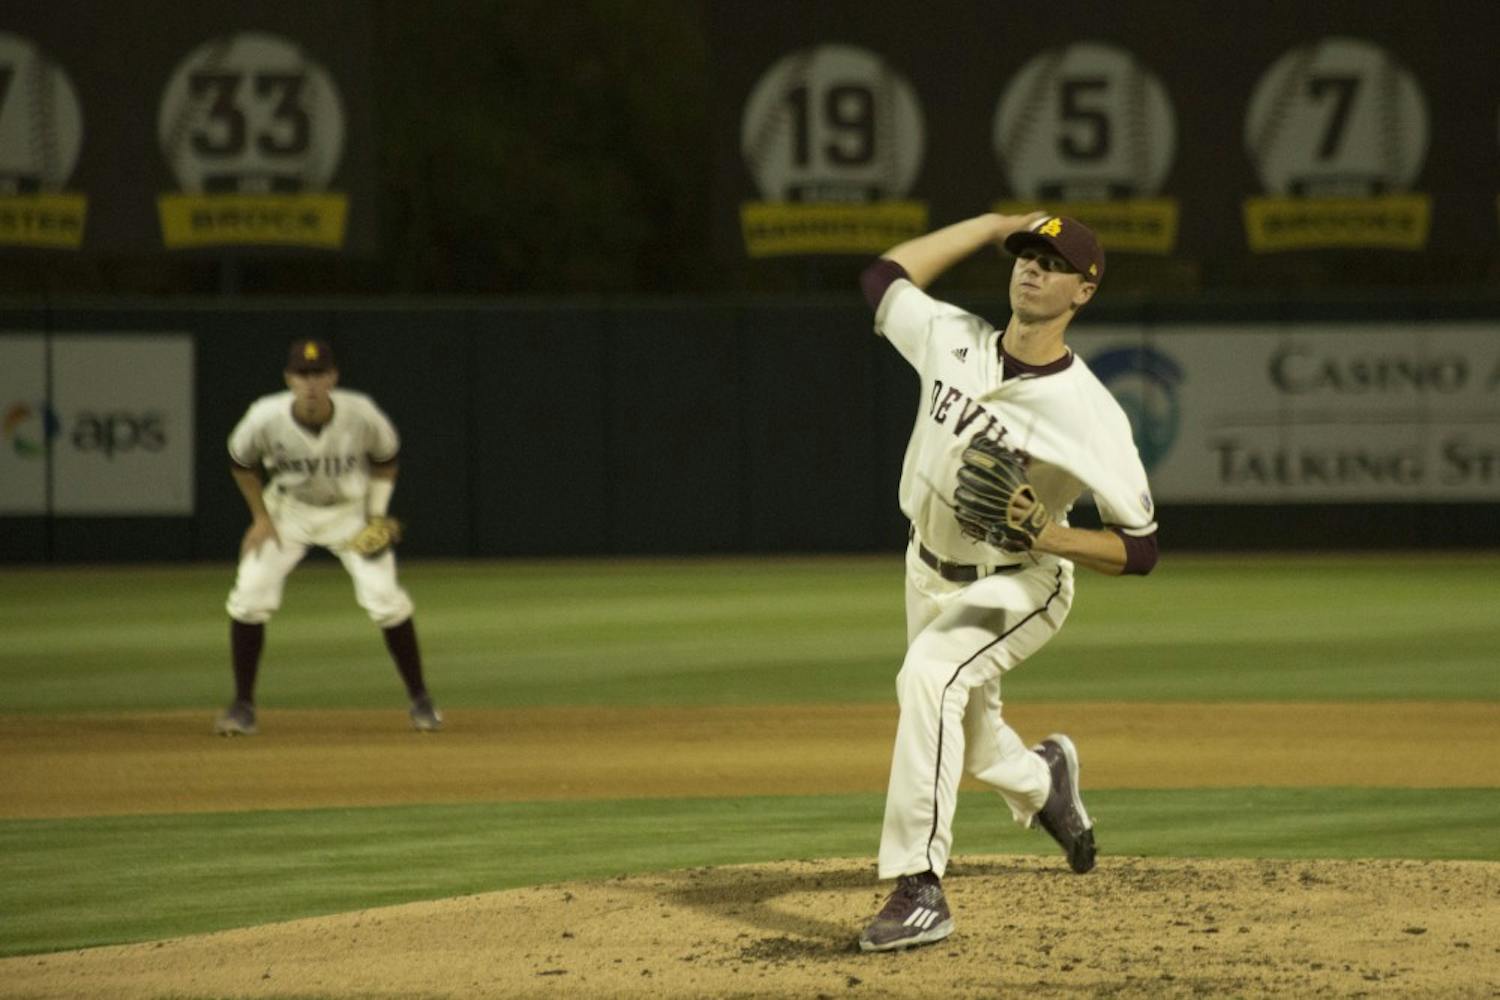 Sophomore Ryan Hingst pitches during ASU's game against the University of Utah at Phoenix Municipal Stadium on Friday, March 25, 2016.&nbsp;Hingst threw a no-hitter and ASU went on defeat Utah&nbsp;5-0.